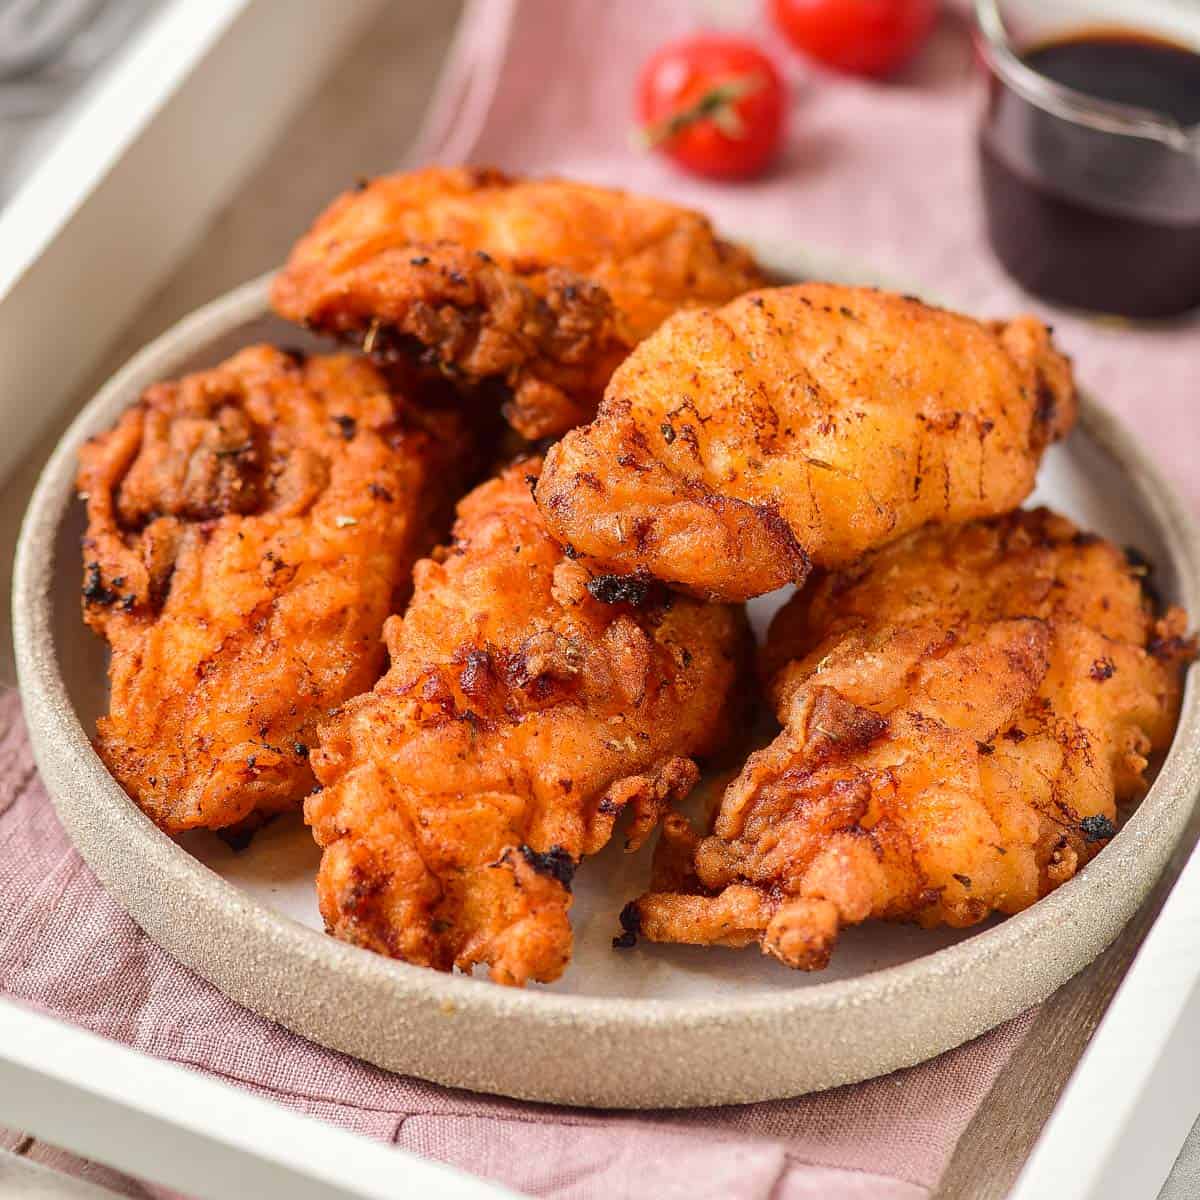 Shallow Fried Chicken Cutlets